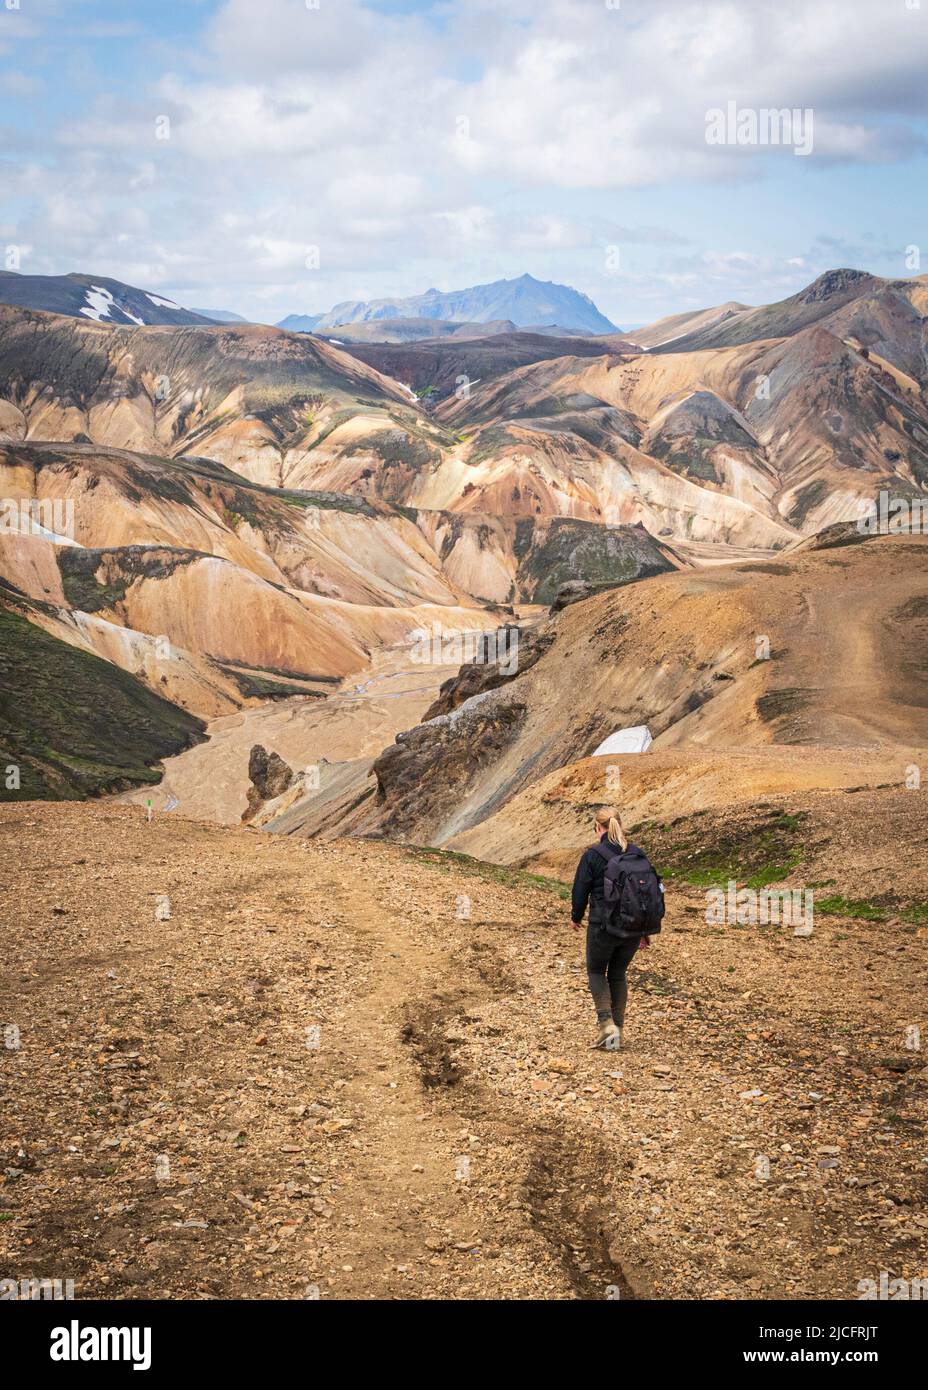 Laugavegur hiking trail is the most famous multi-day trekking tour in Iceland. Landscape shot from the area around Landmannalaugar, starting point of the long-distance hiking trail in the highlands of Iceland. Woman hiking through the beautiful landscape. Stock Photo